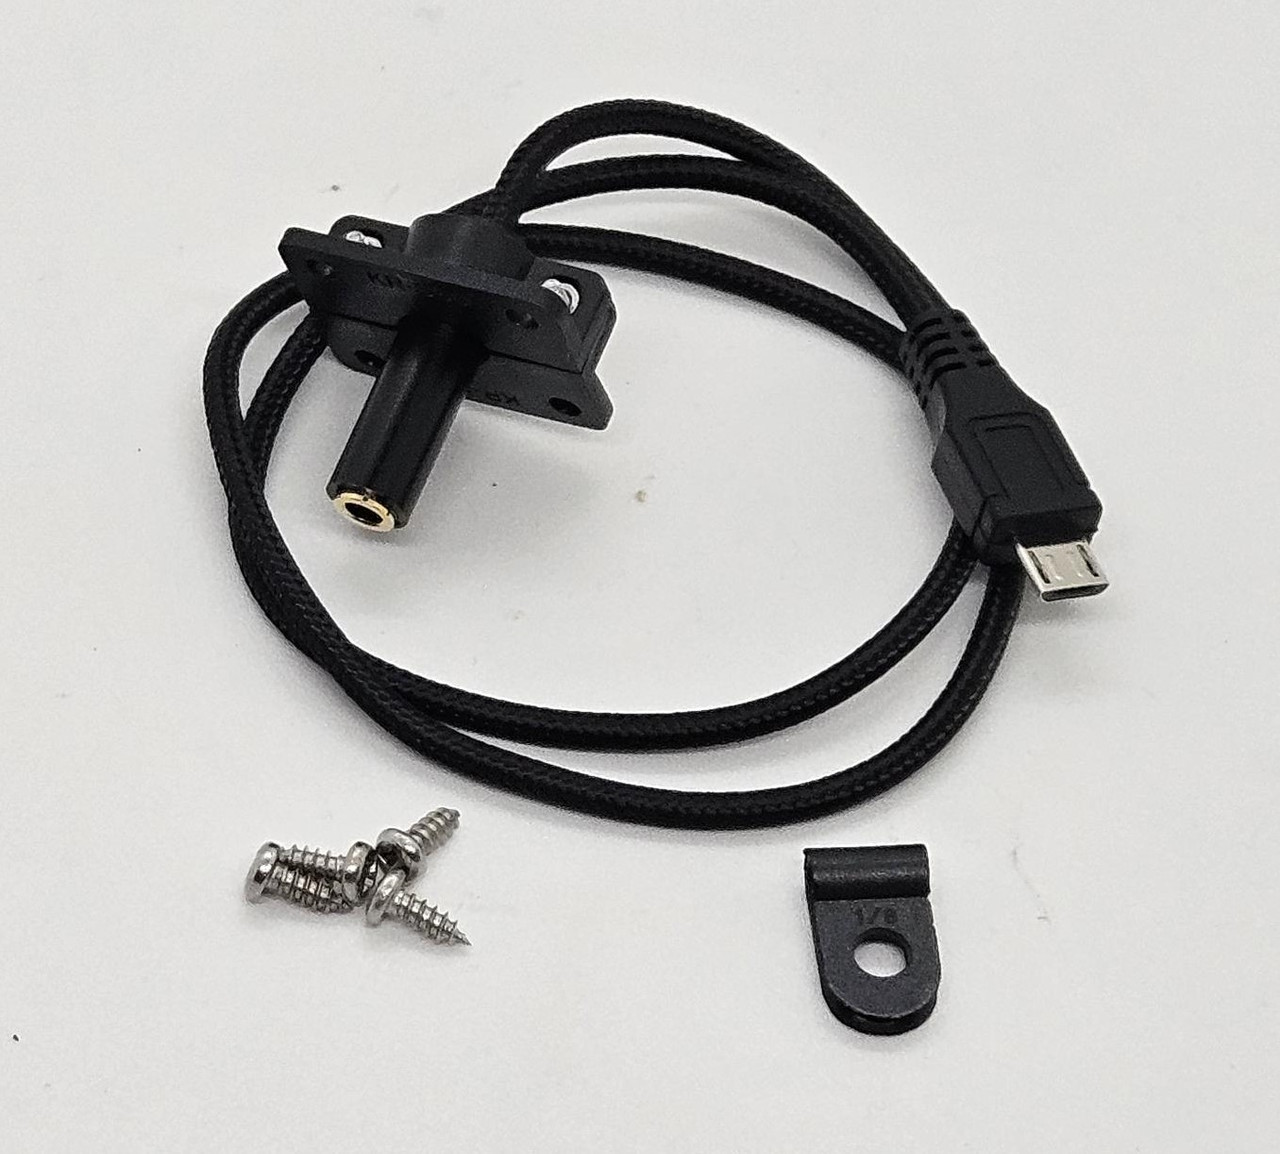 Power Jack cable with usbC to 3.5mm plug